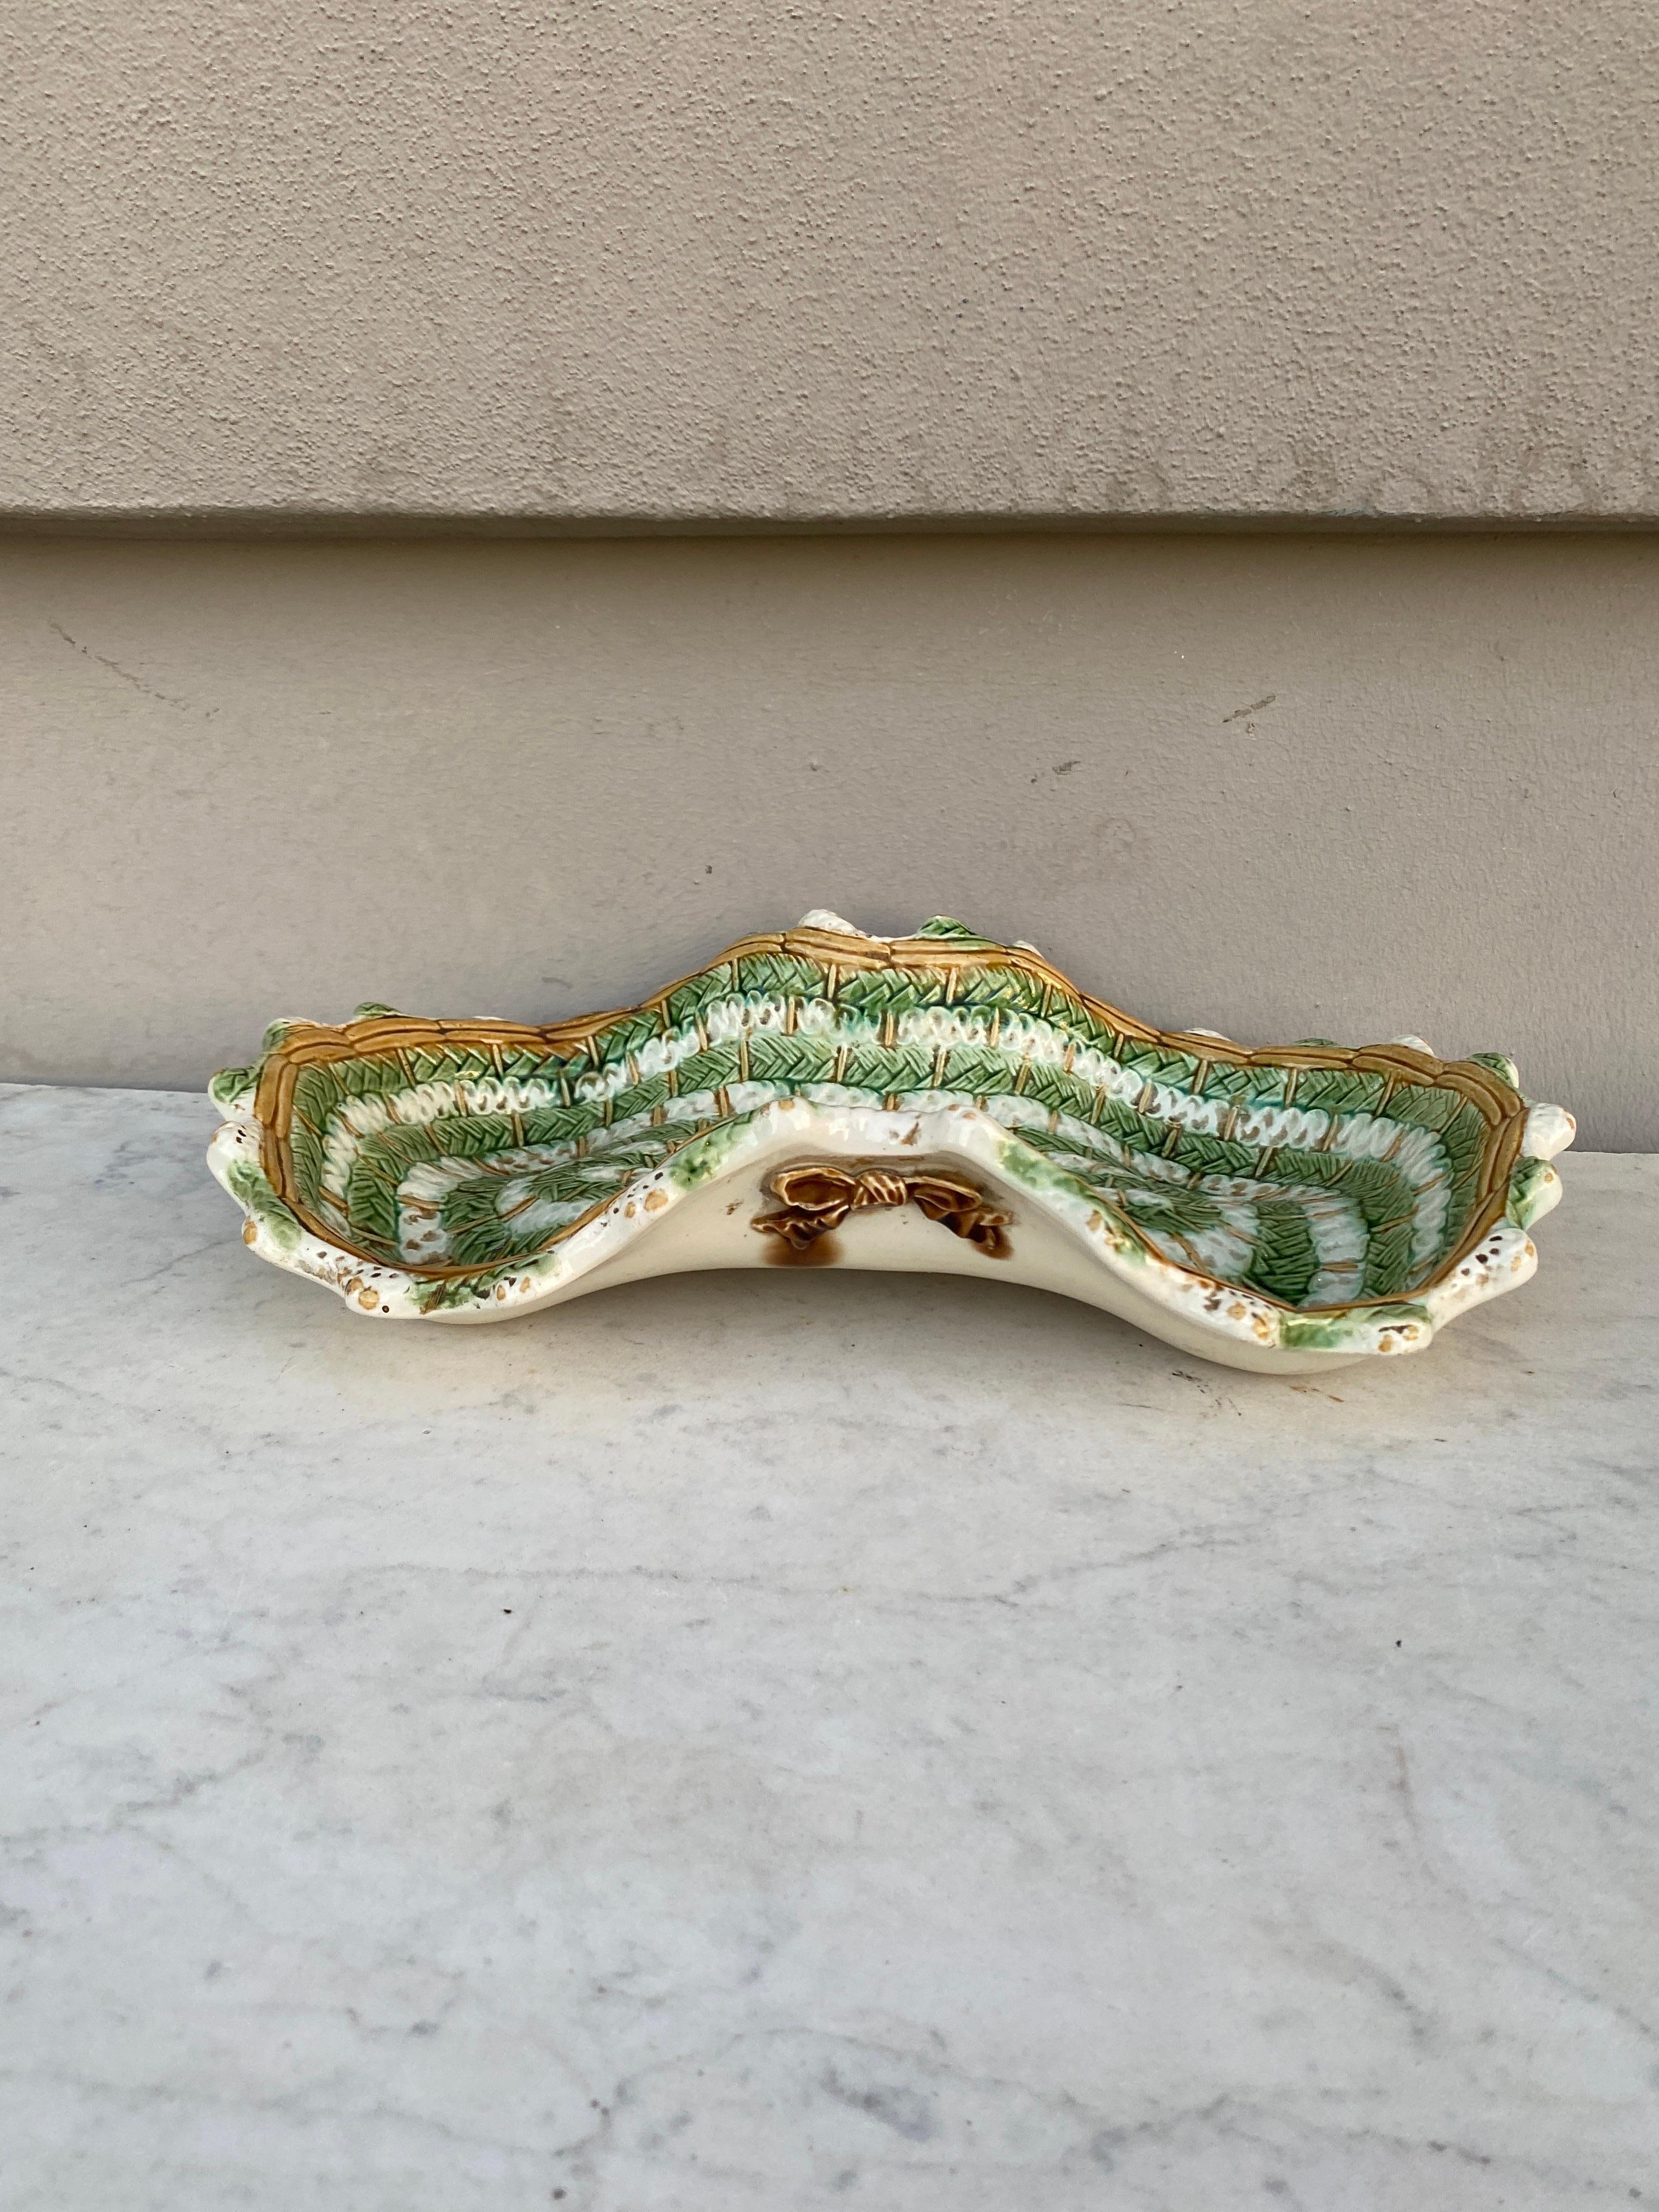 French Majolica asparagus platter with a bow circa 1890.